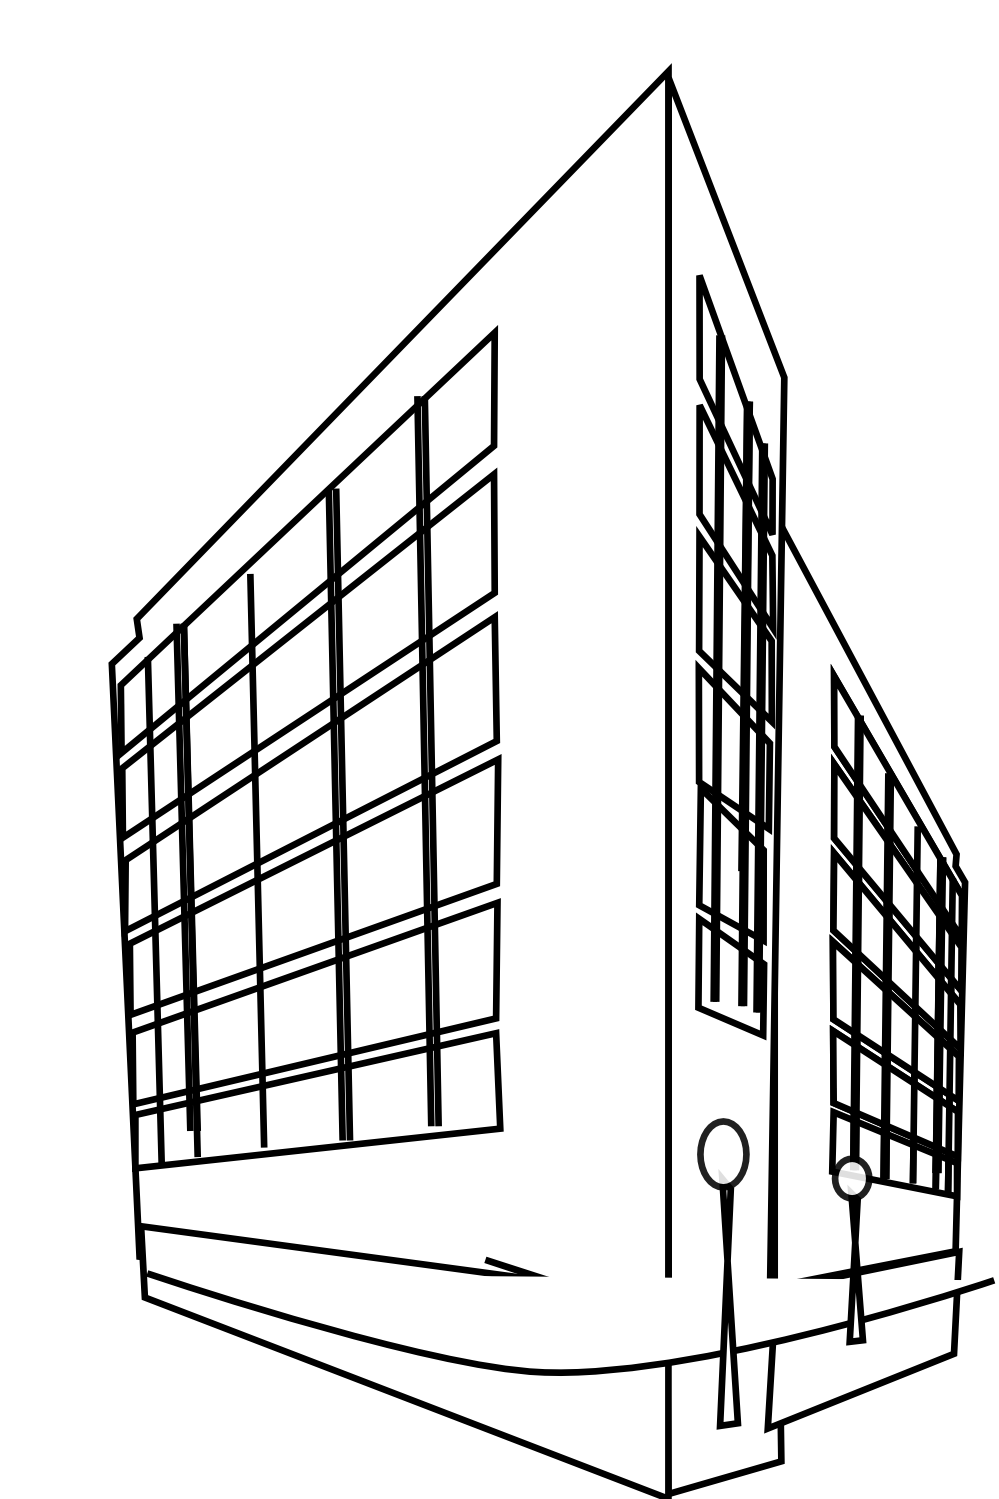 Building Clipart Black And White | Clipart Panda - Free Clipart Images